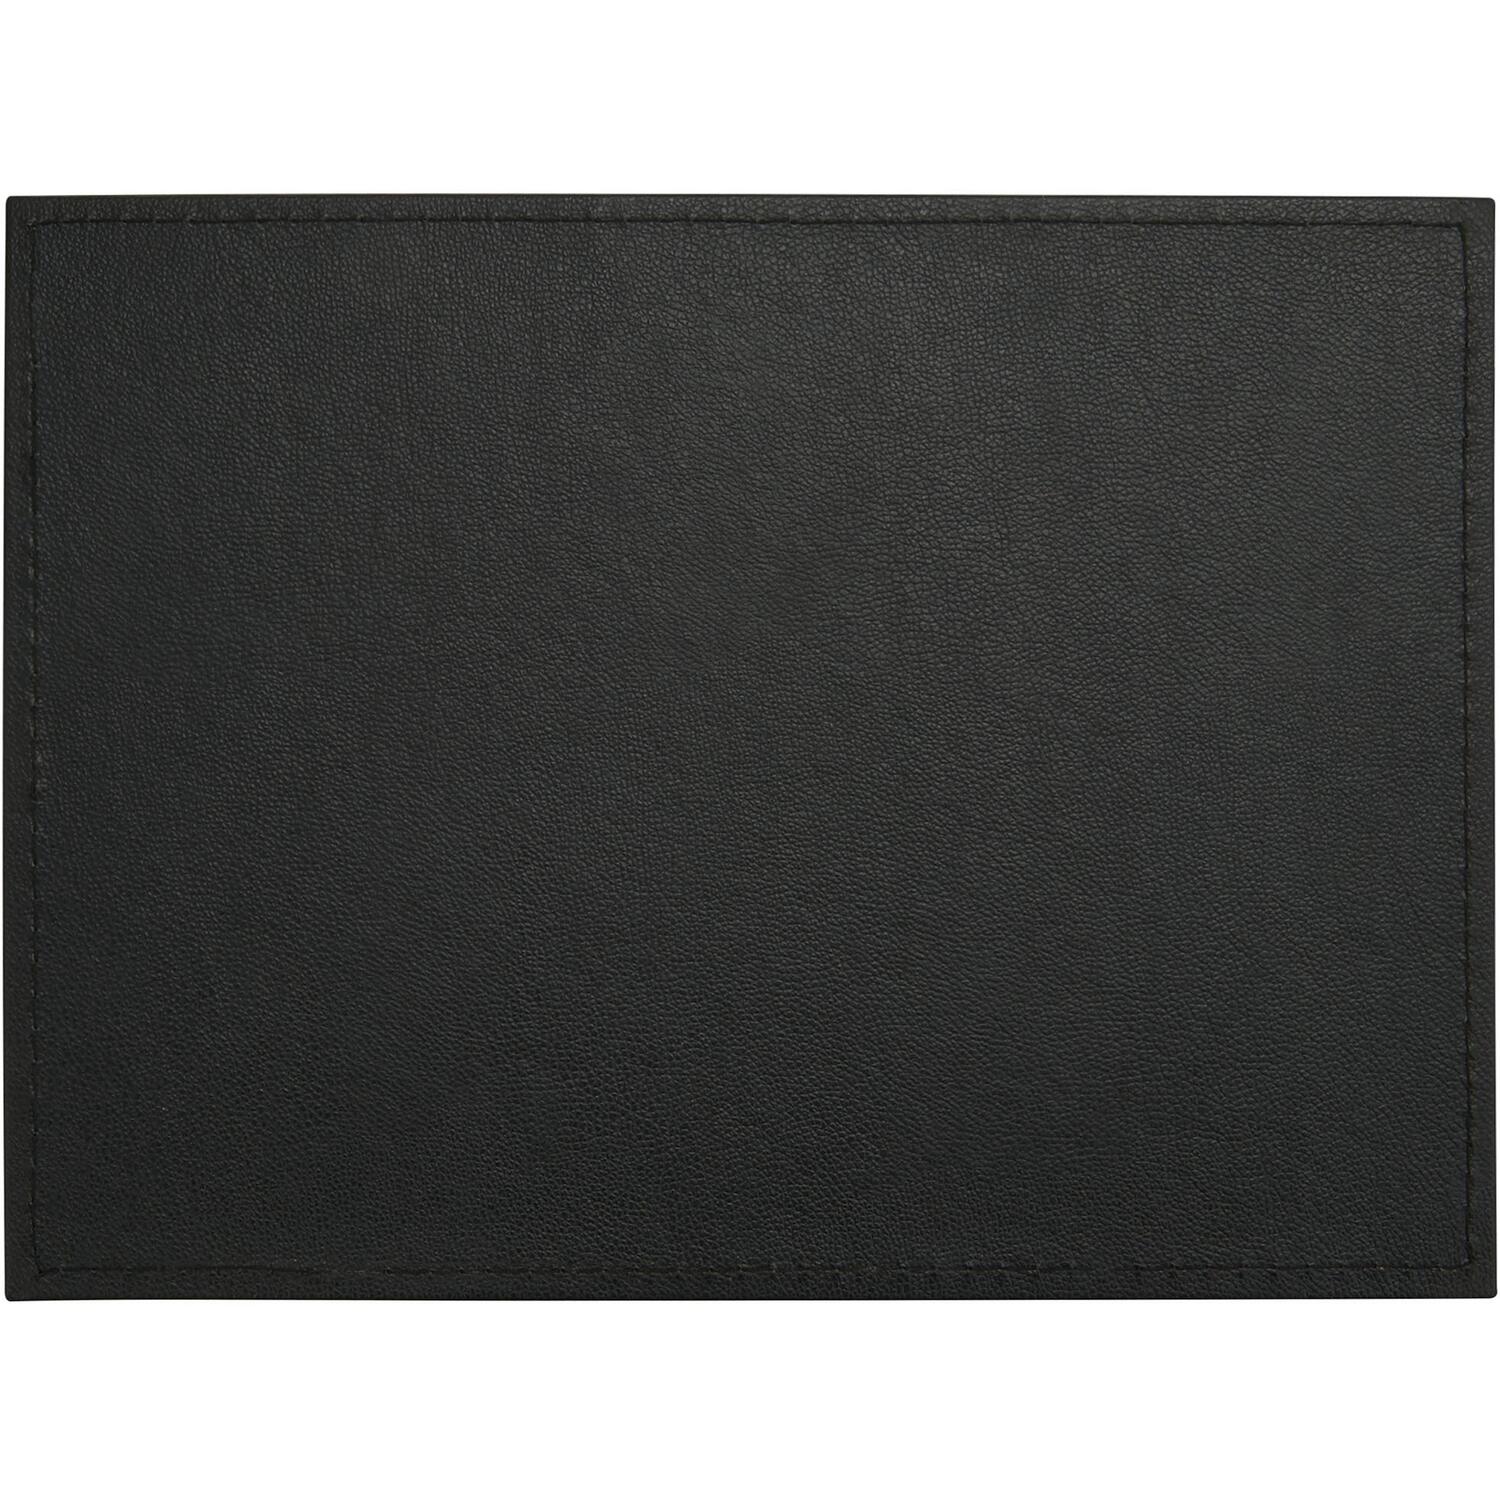 Pack of 4 Linen Texture Placemats - Black Image 5